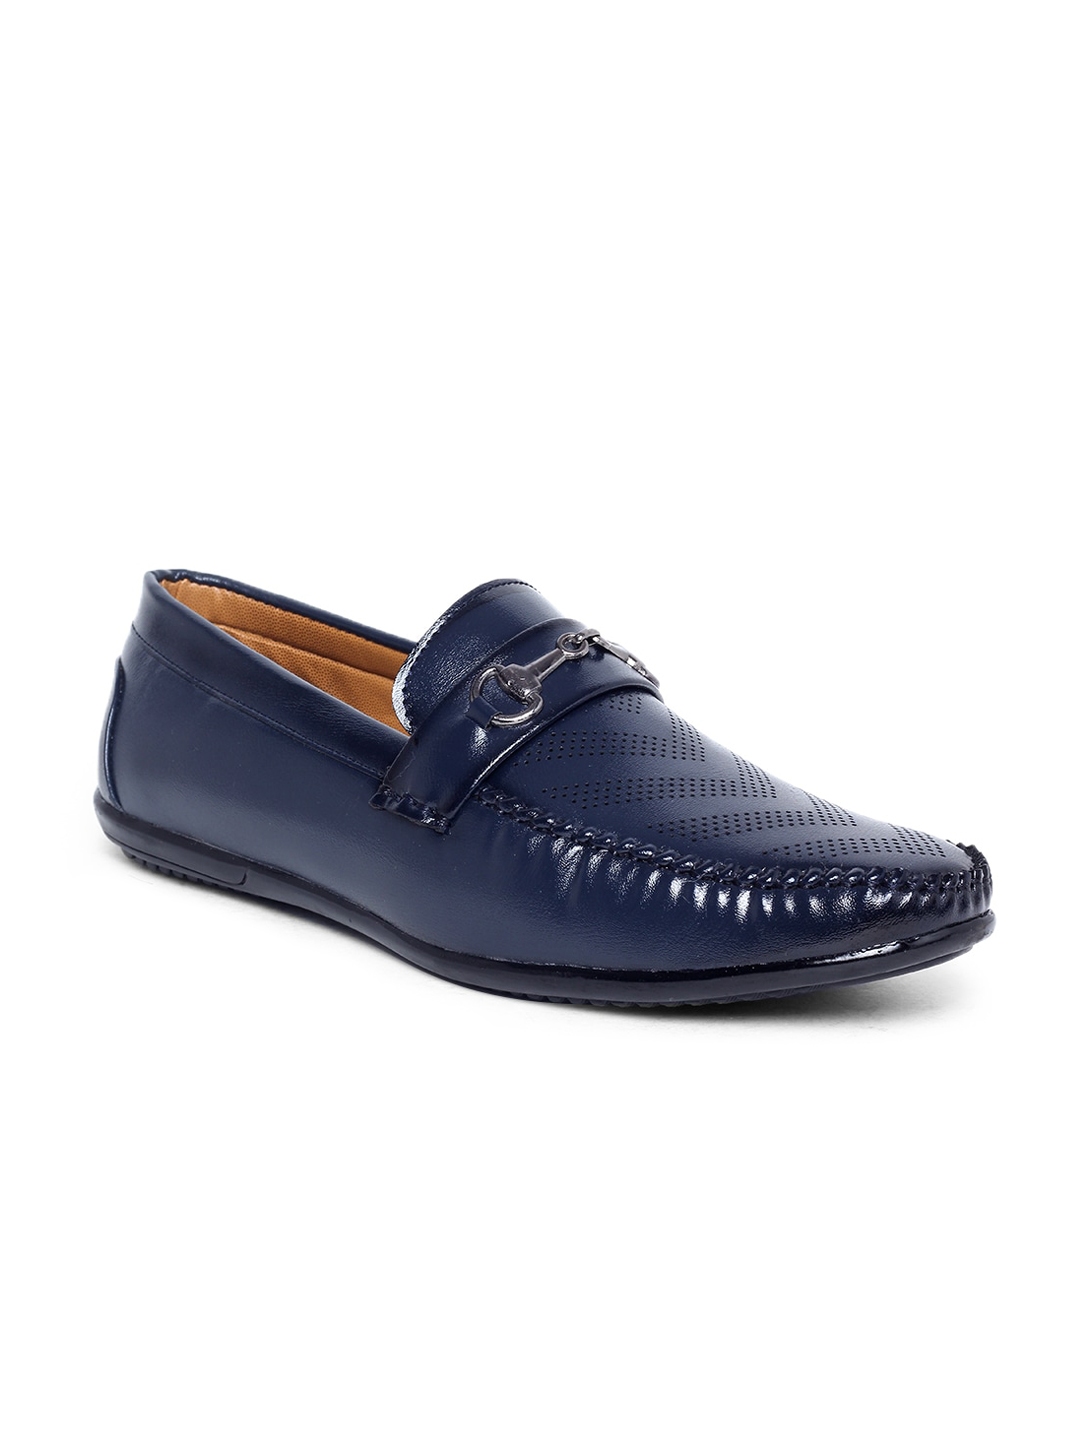 Buy MUTAQINOTI Men Blue Textured Patent Leather Loafers - Casual Shoes ...